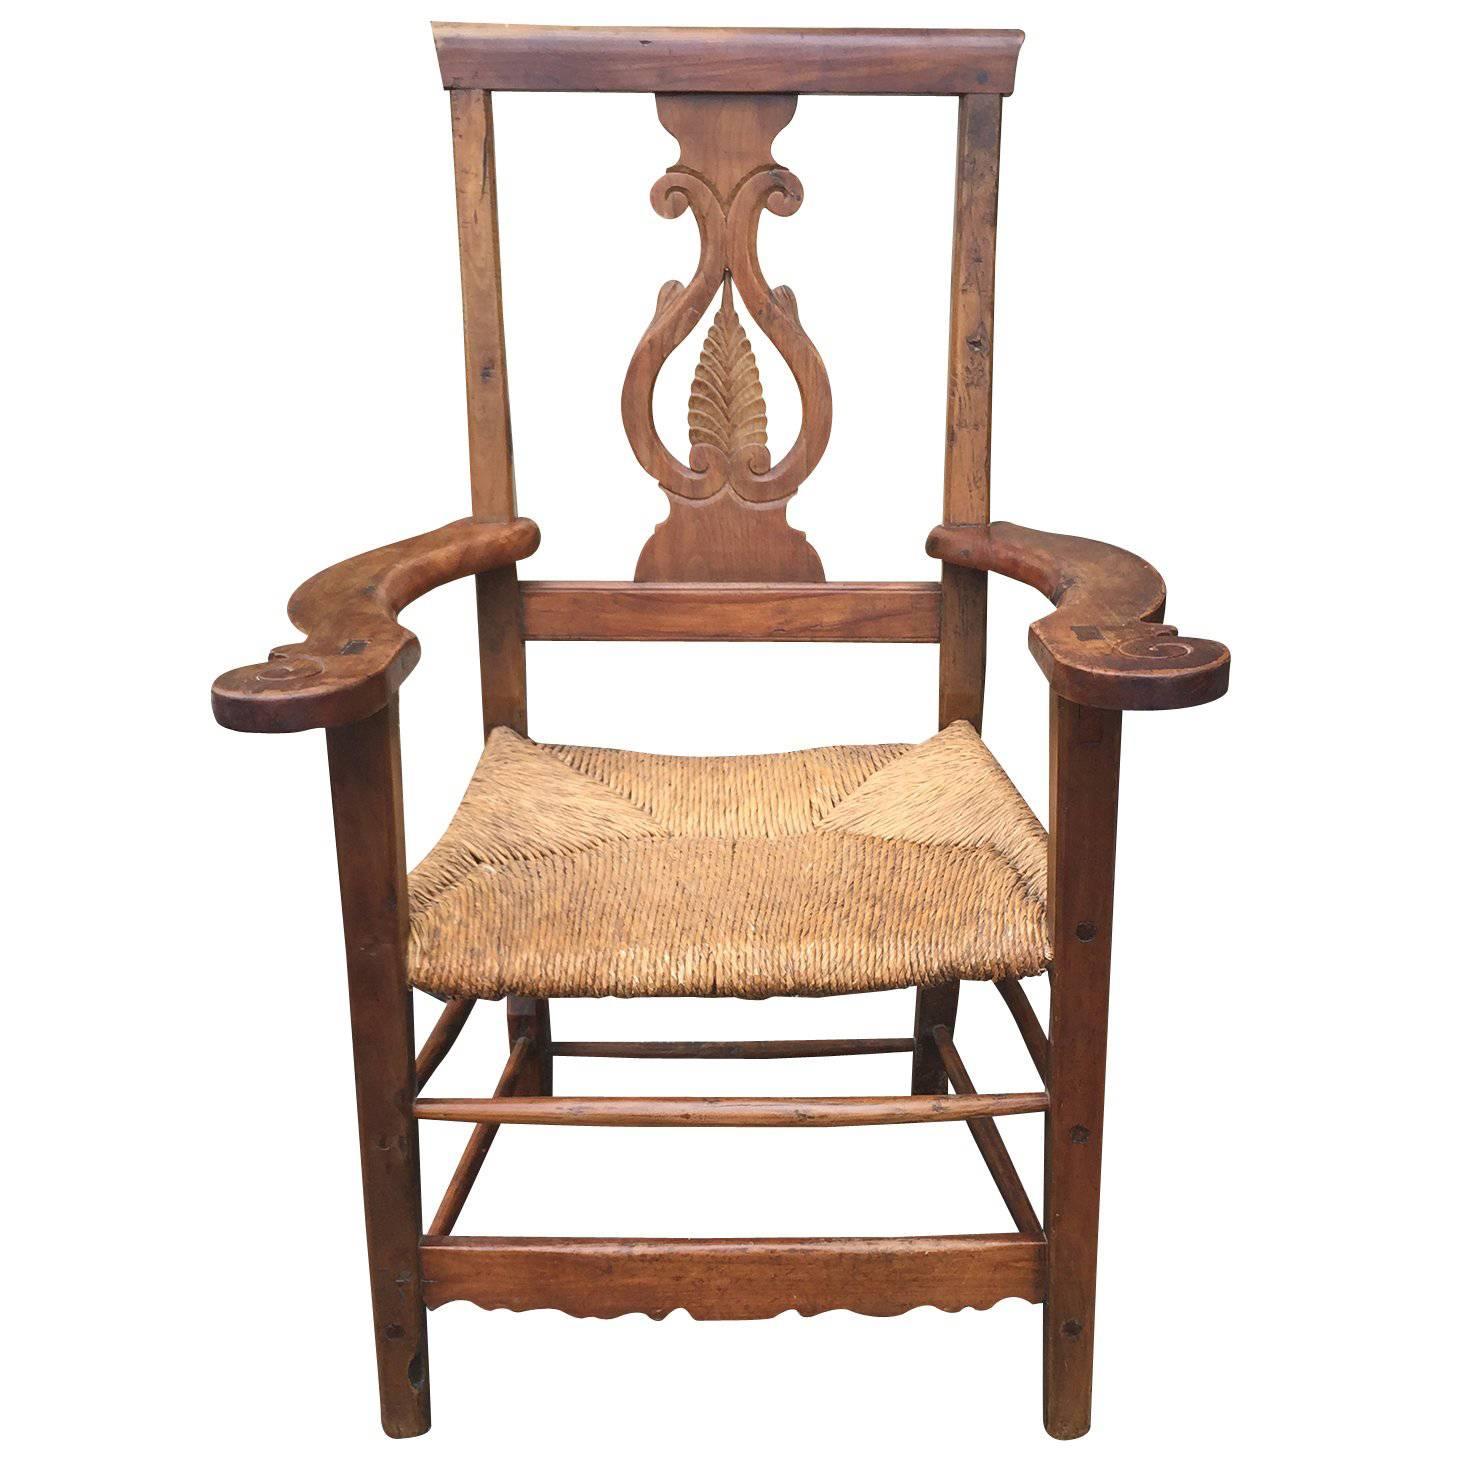 18th-19th Century Provencial Italian Chair, Walnut with Rush Seat